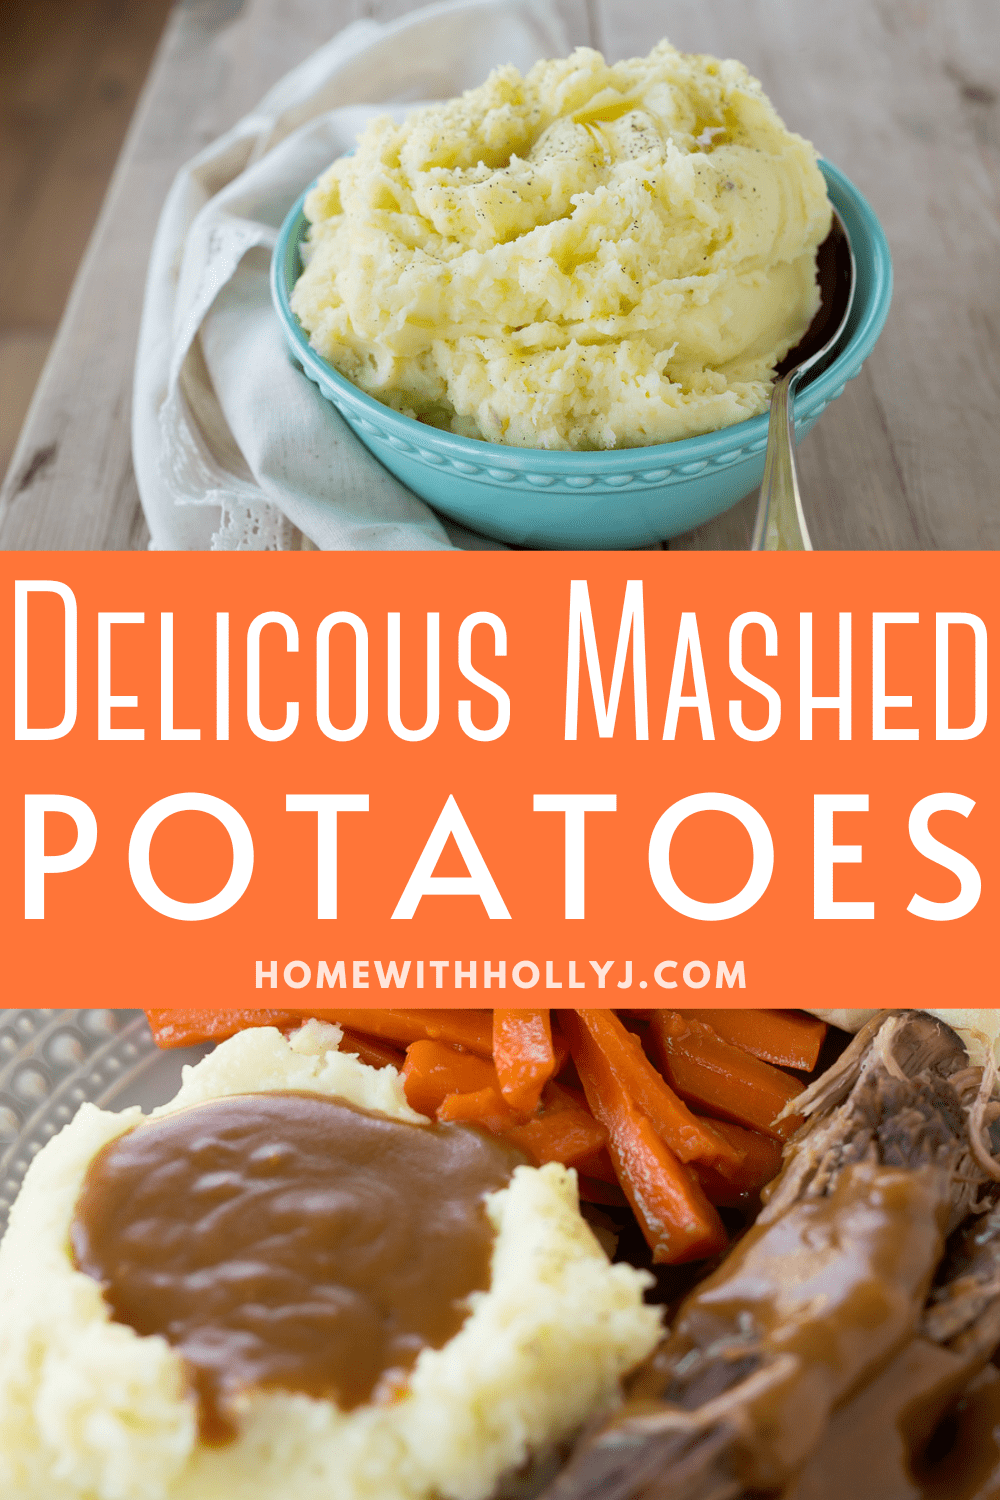 With just a few simple steps, you can make this delicious mashed potatoes recipe for the perfect side dish for any meal. Learn more here.